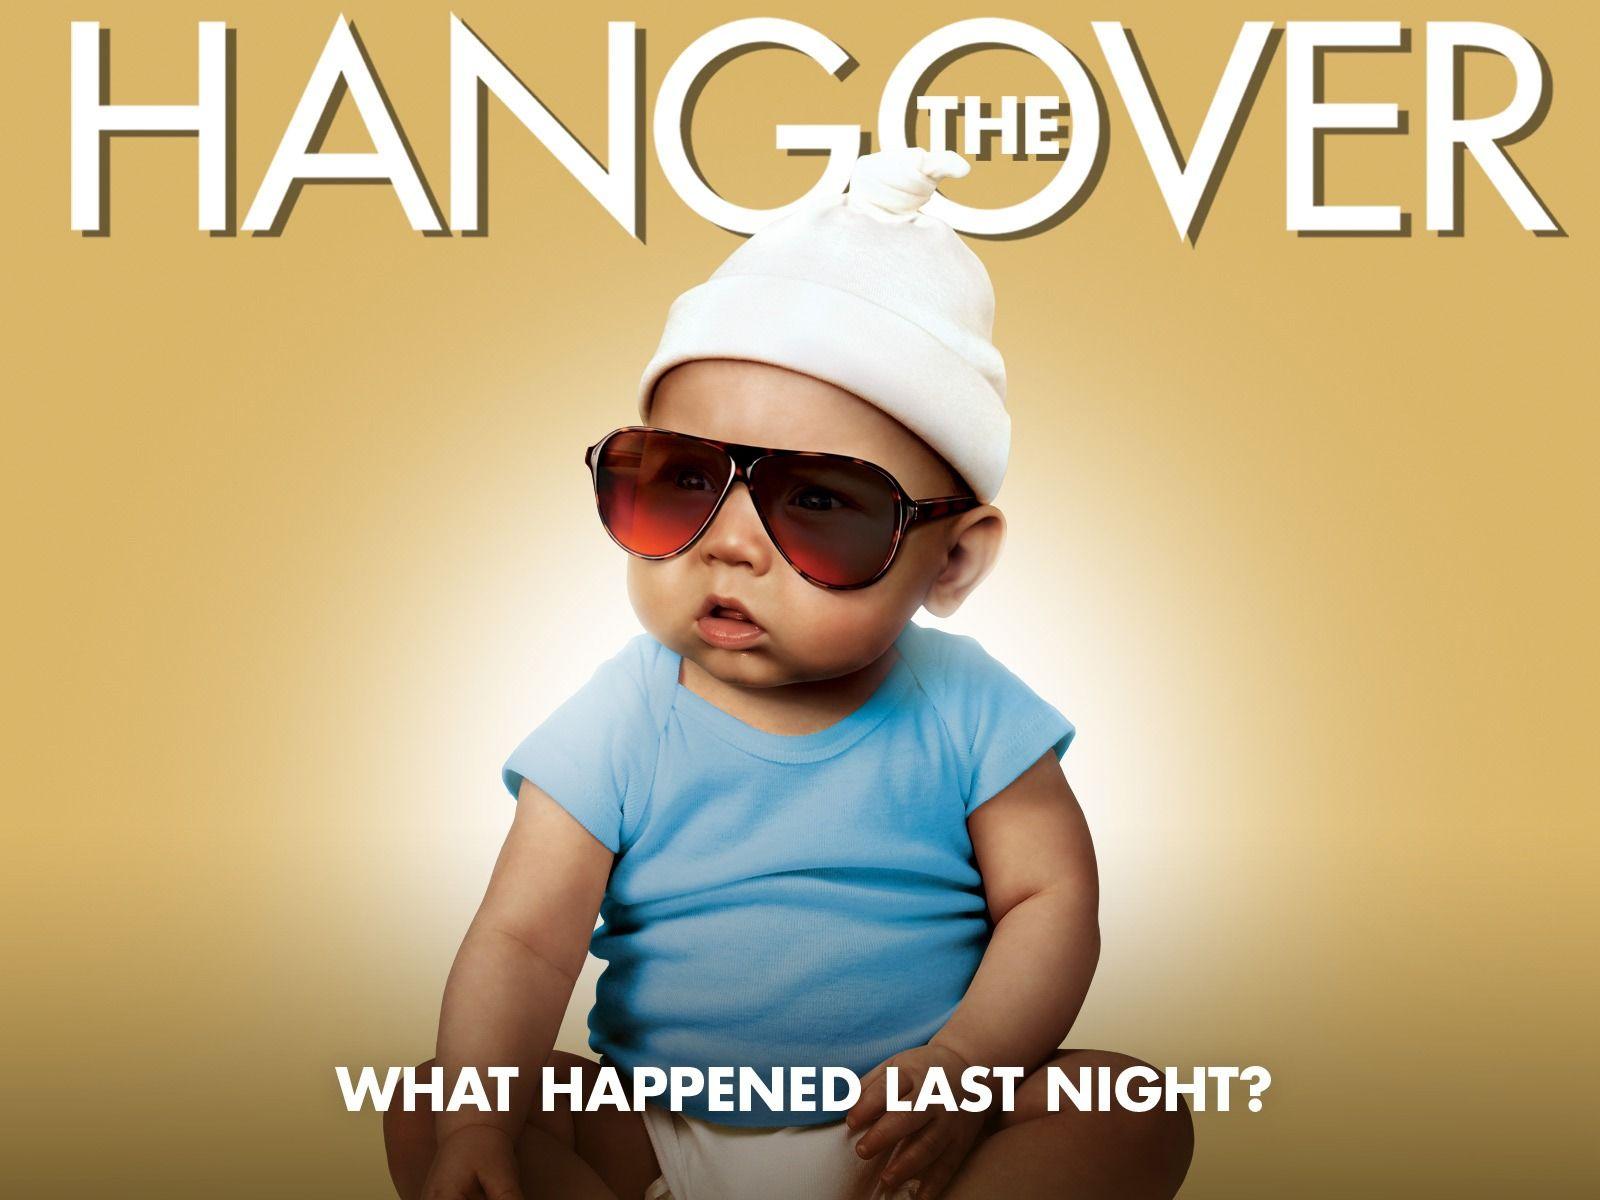 The Hangover Wallpaper The Hangover Movies Wallpaper in jpg